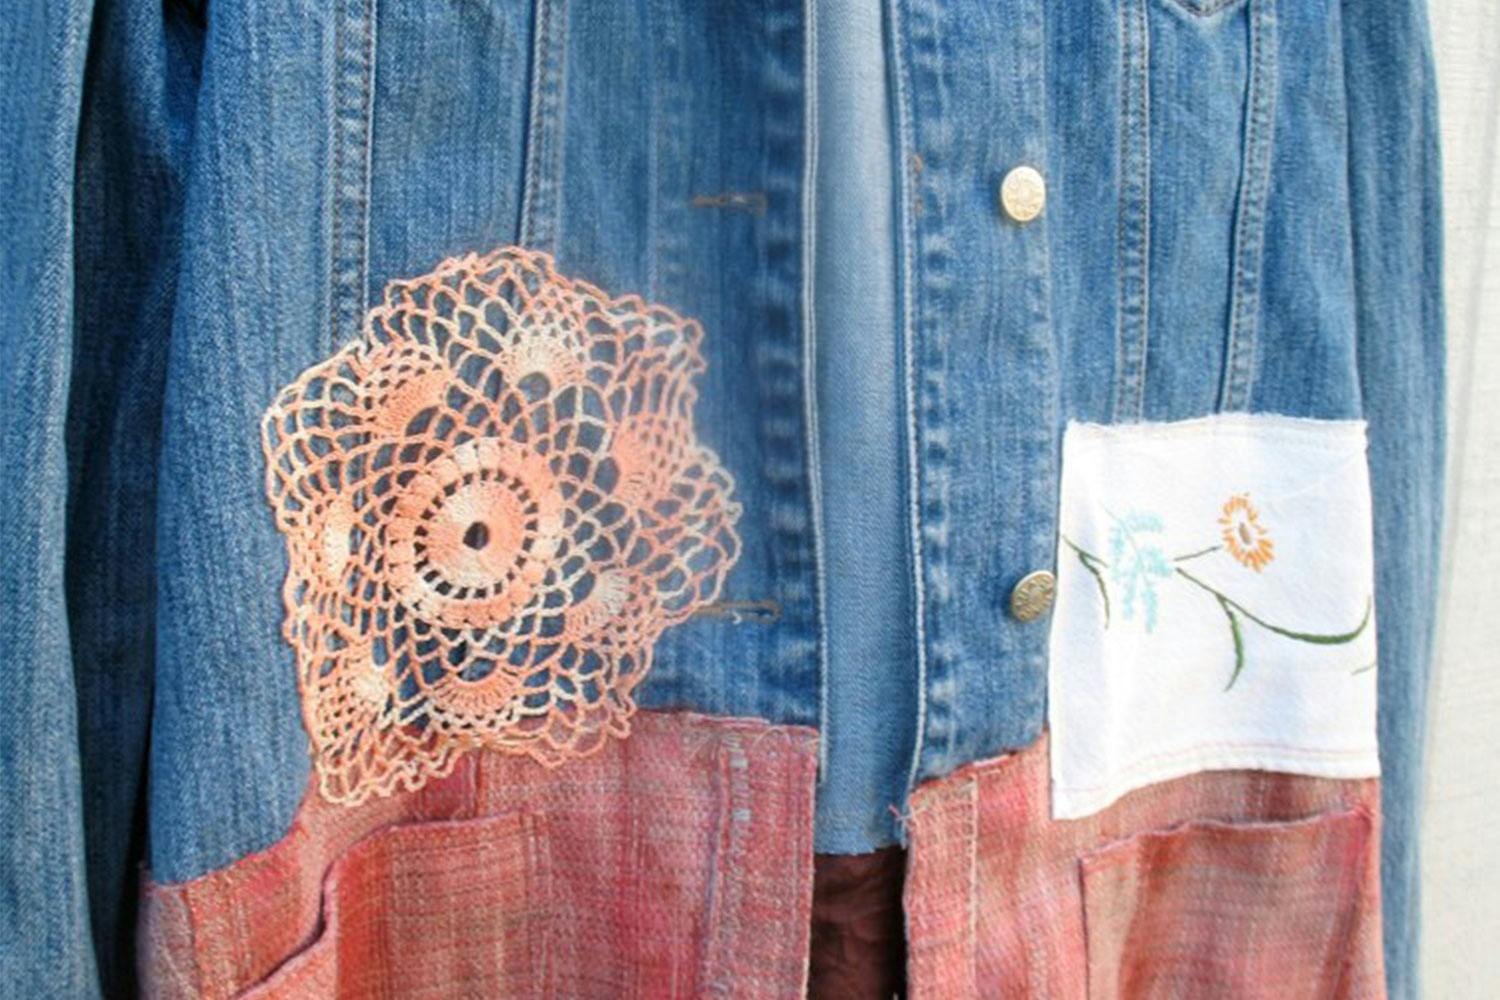 A jean jacket customized with red lower half, an orange flower patch, and a white square patch embroidered with flowers.